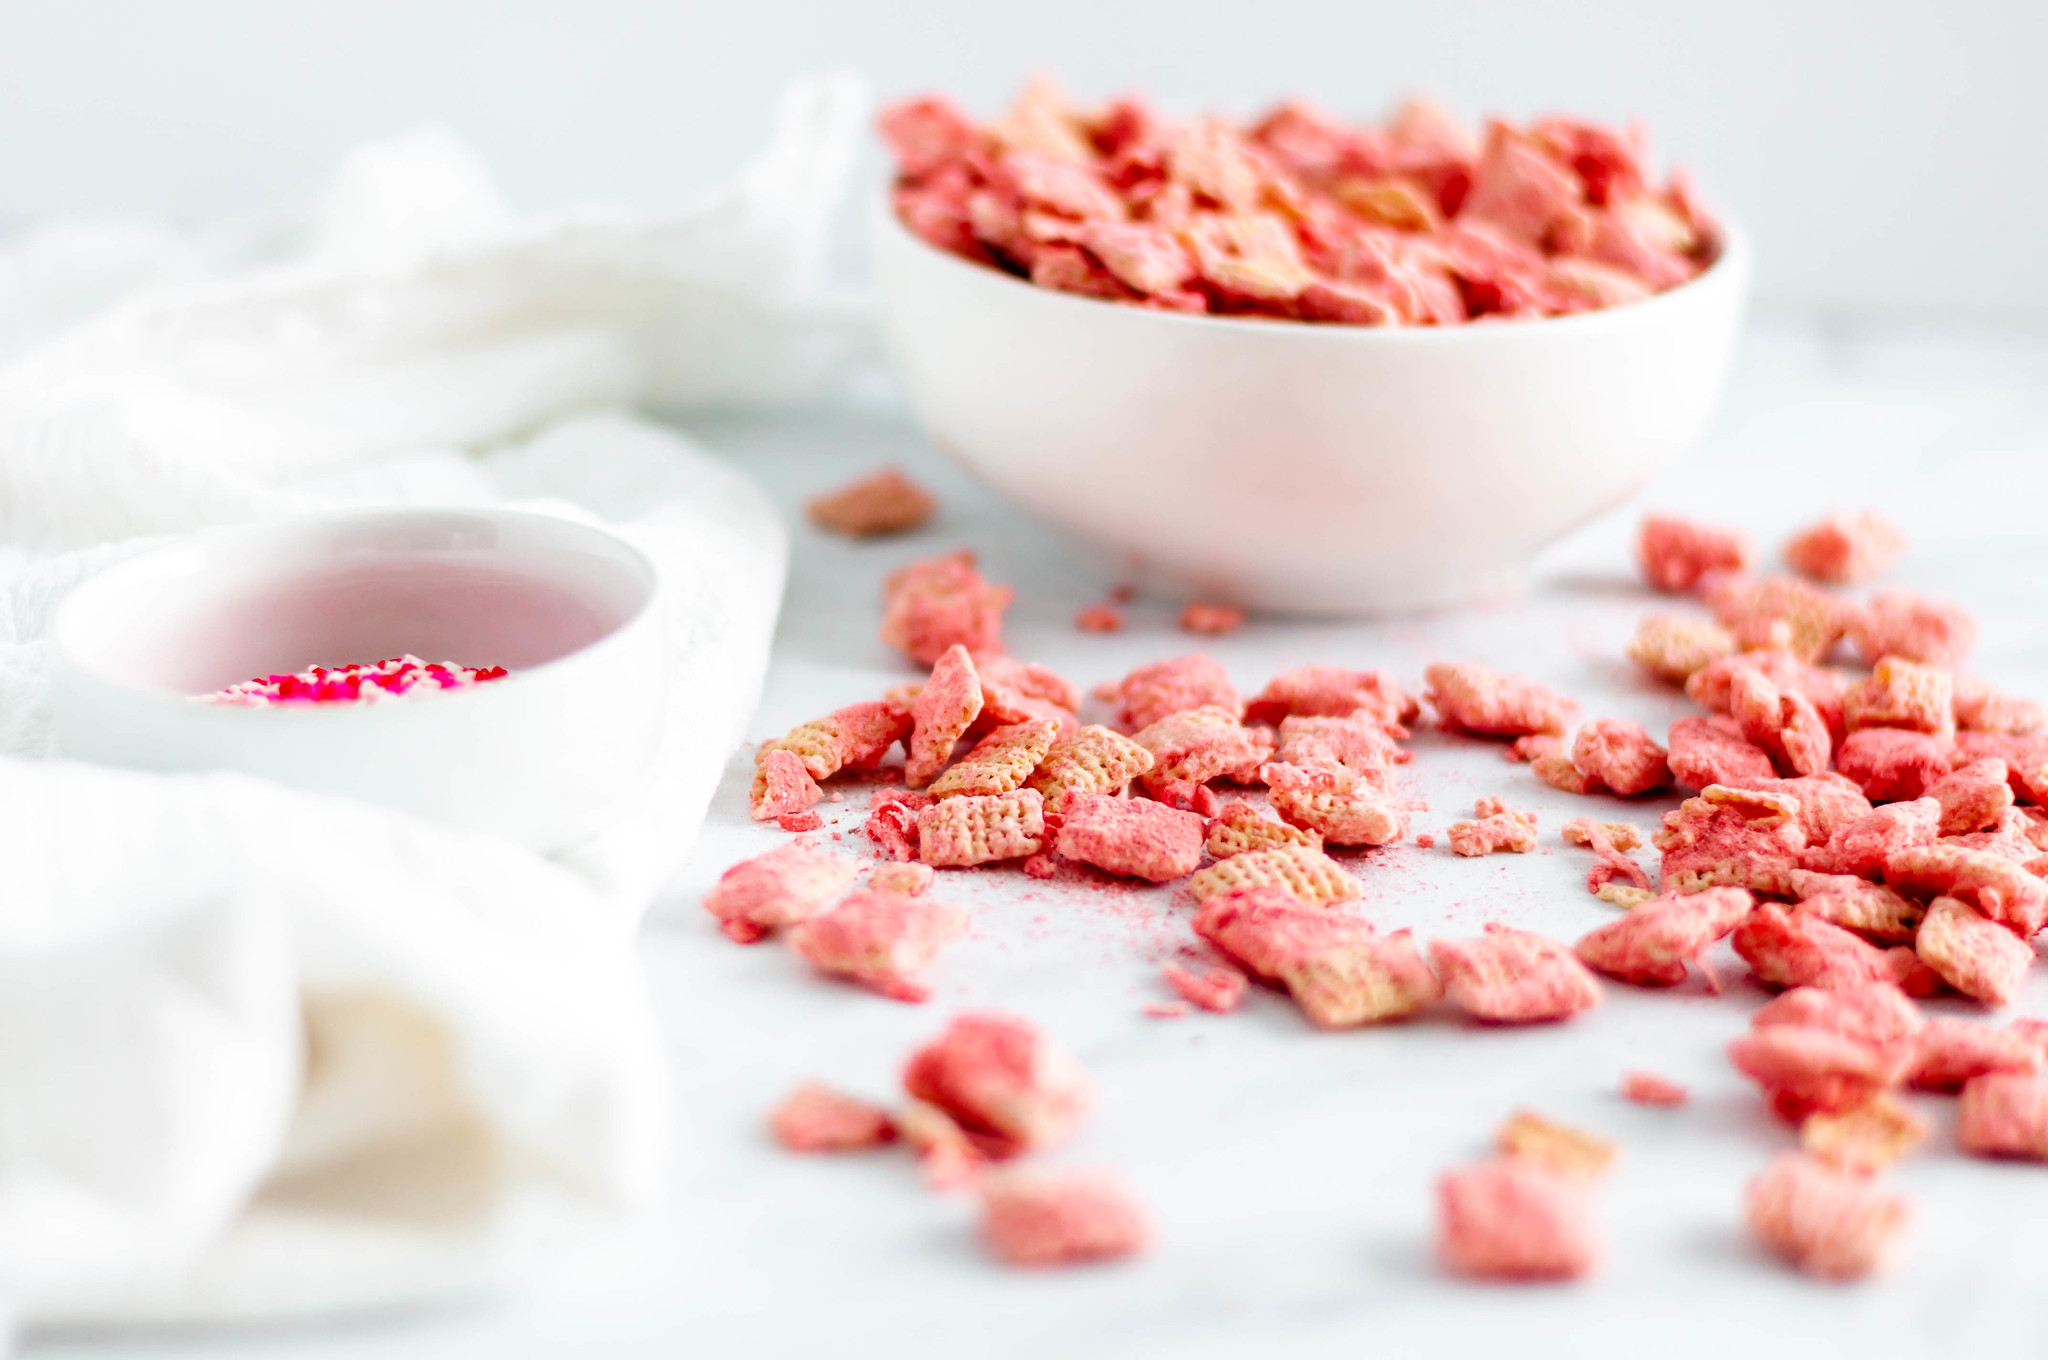 Make your Valentines Day festive with this Coconut Strawberry Puppy Chow. White chocolate, freeze dried strawberries & coconut are such a sweet combination.